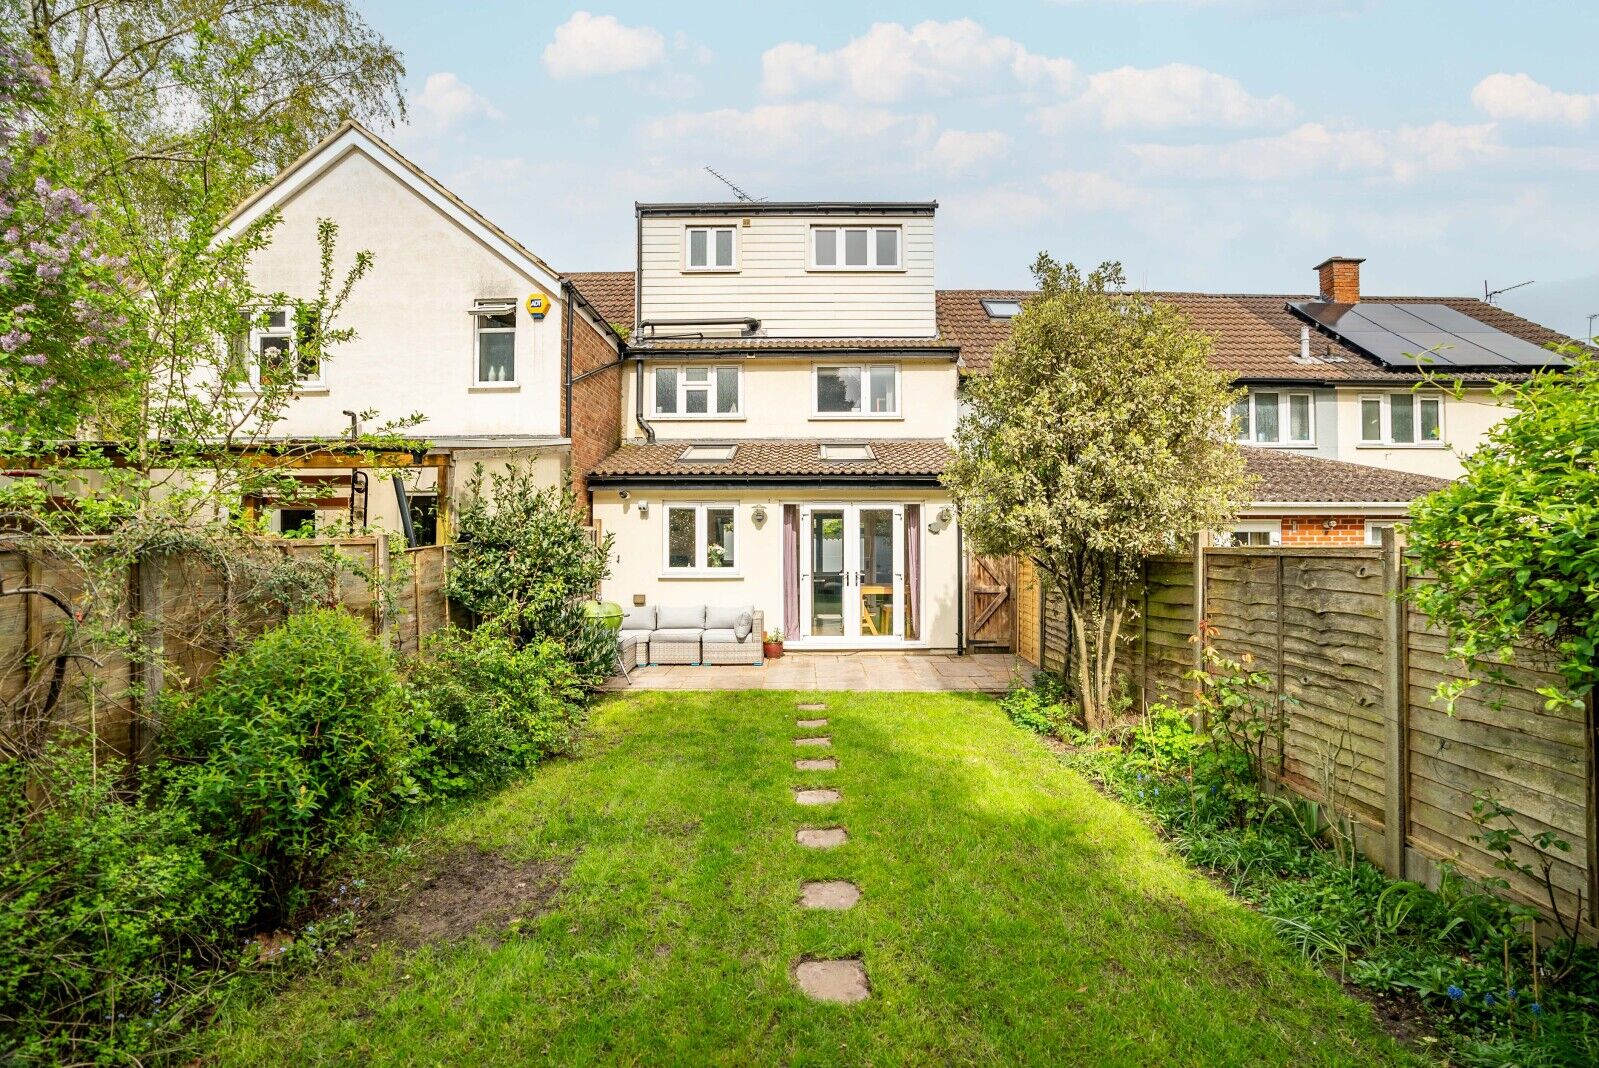 3 bedroom mid terraced house for sale Drakes Drive, St. Albans, AL1, main image